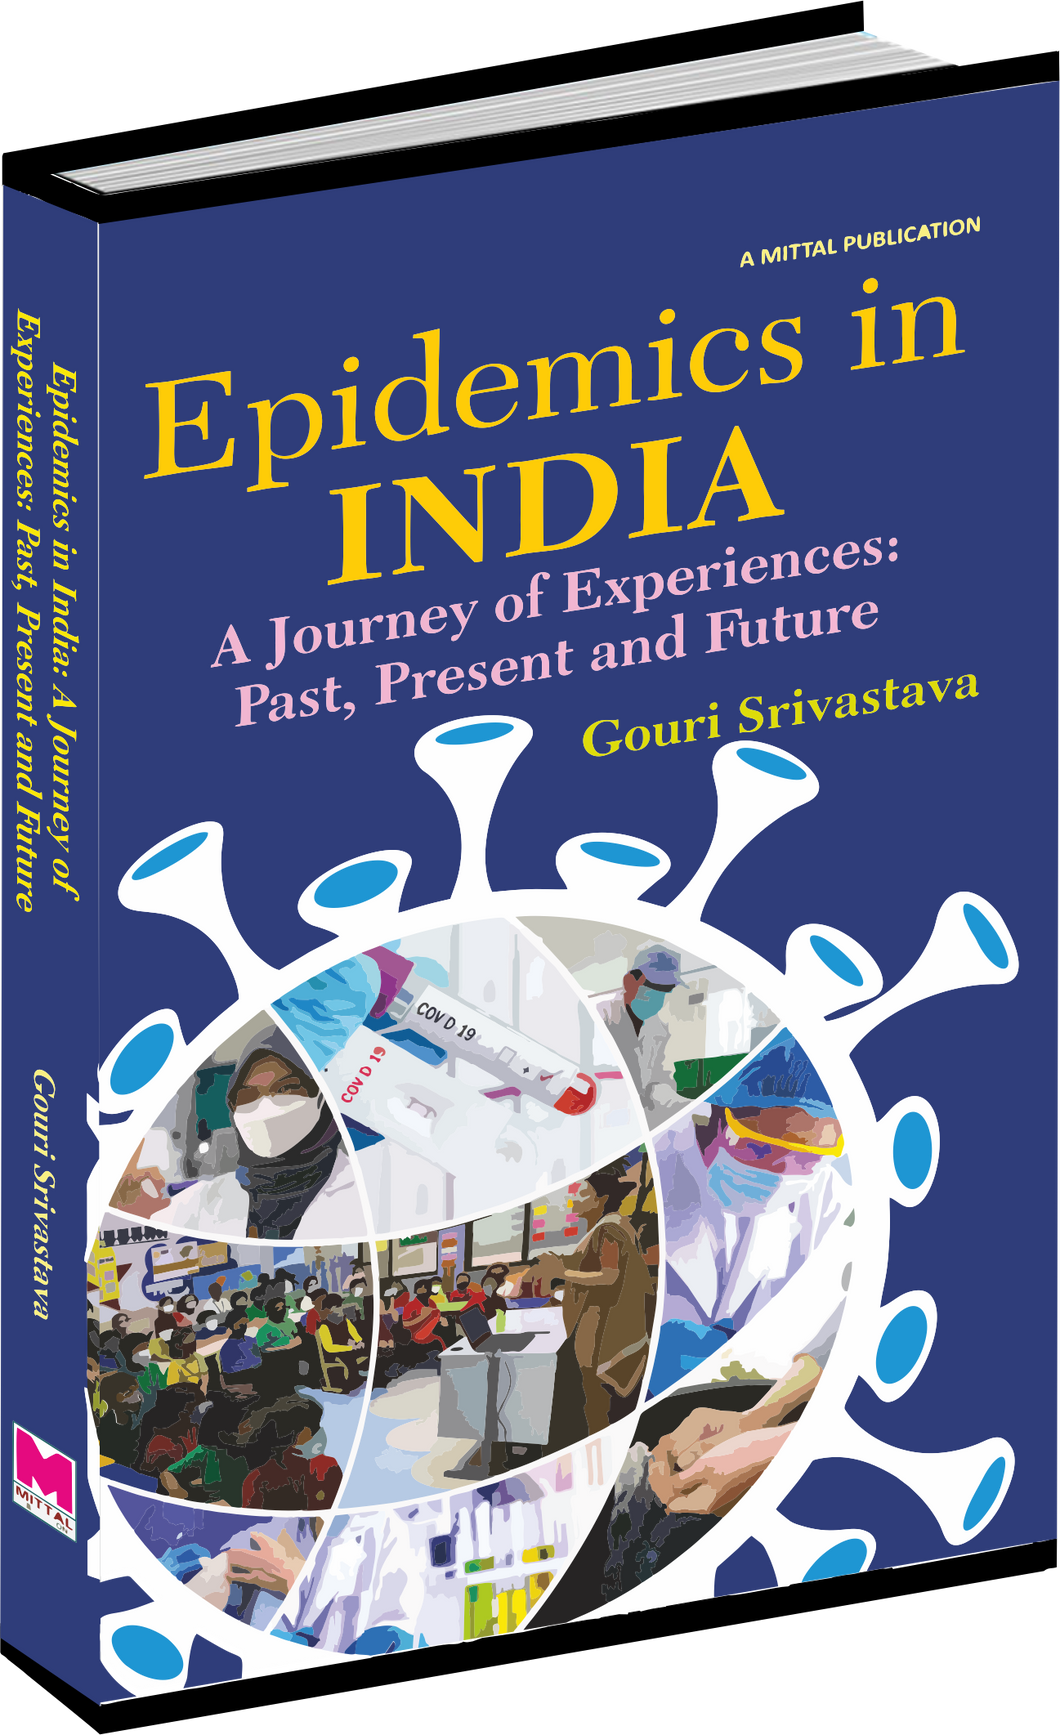 Epidemics in India: A Journey of Experiences- Past, Present and Future by Gouri Srivastava